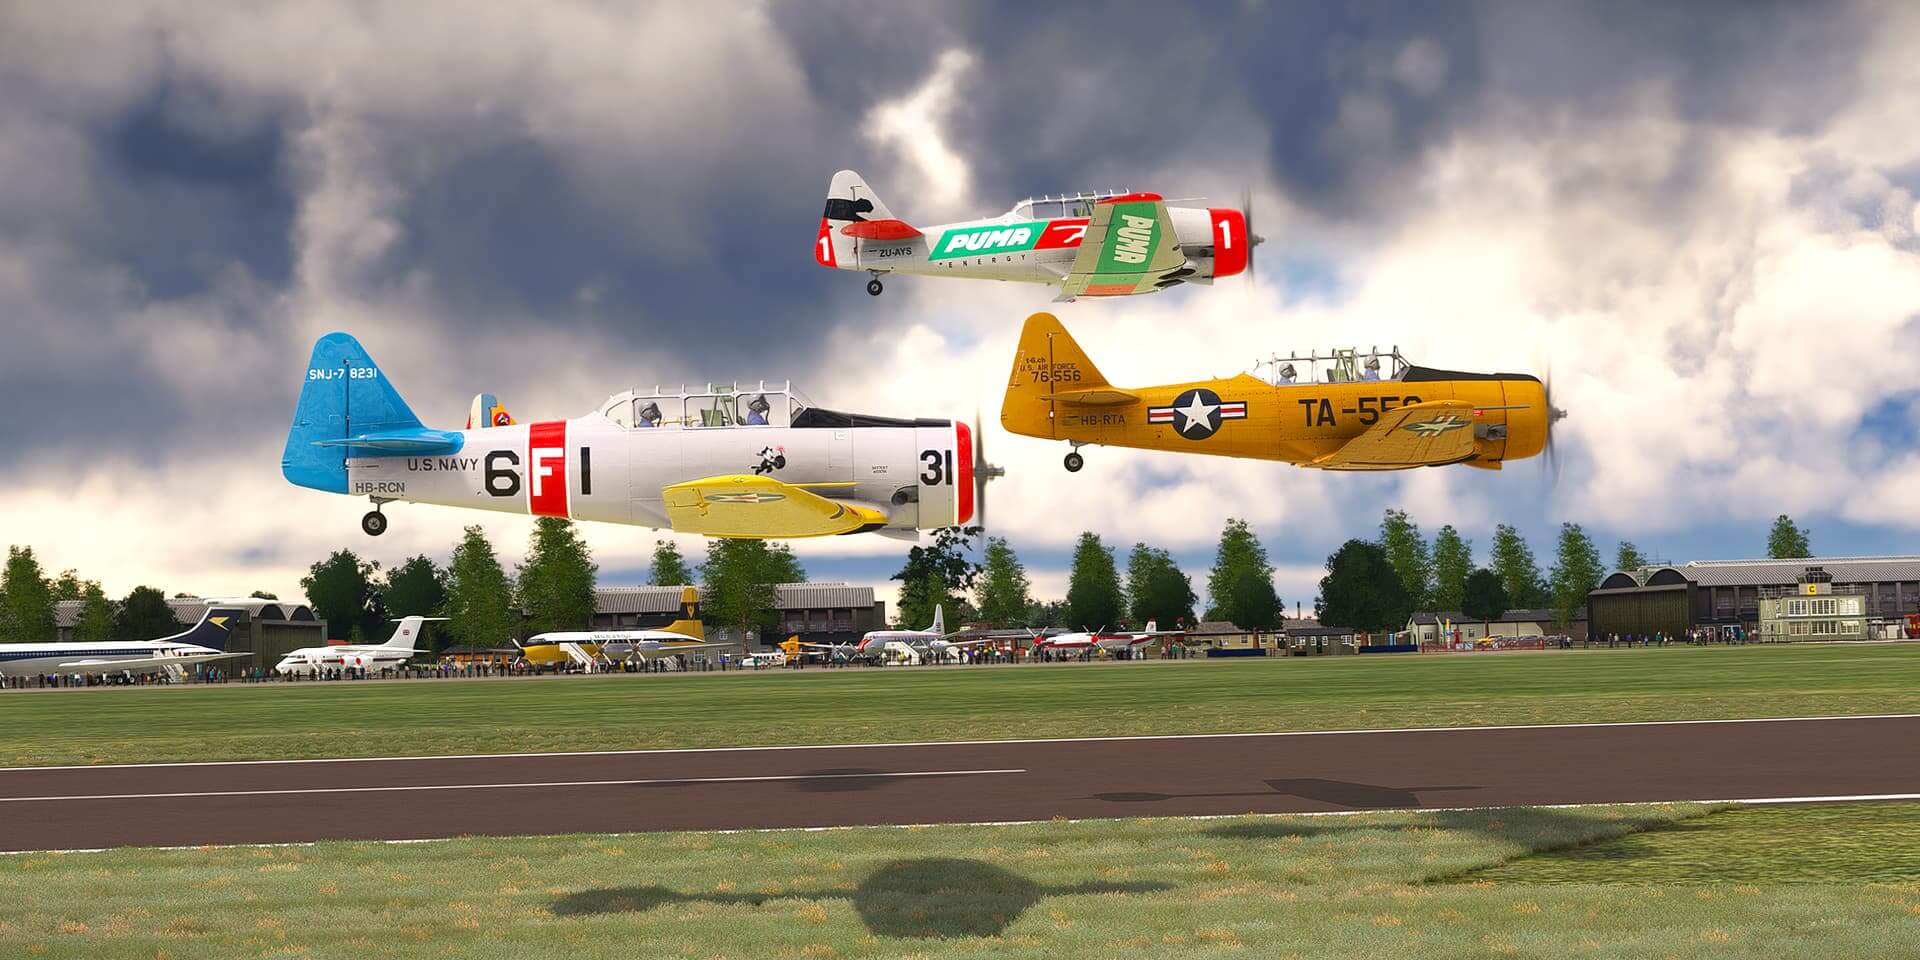 Three T-6 Texans fly in low formation close to a runway as they display at an airshow